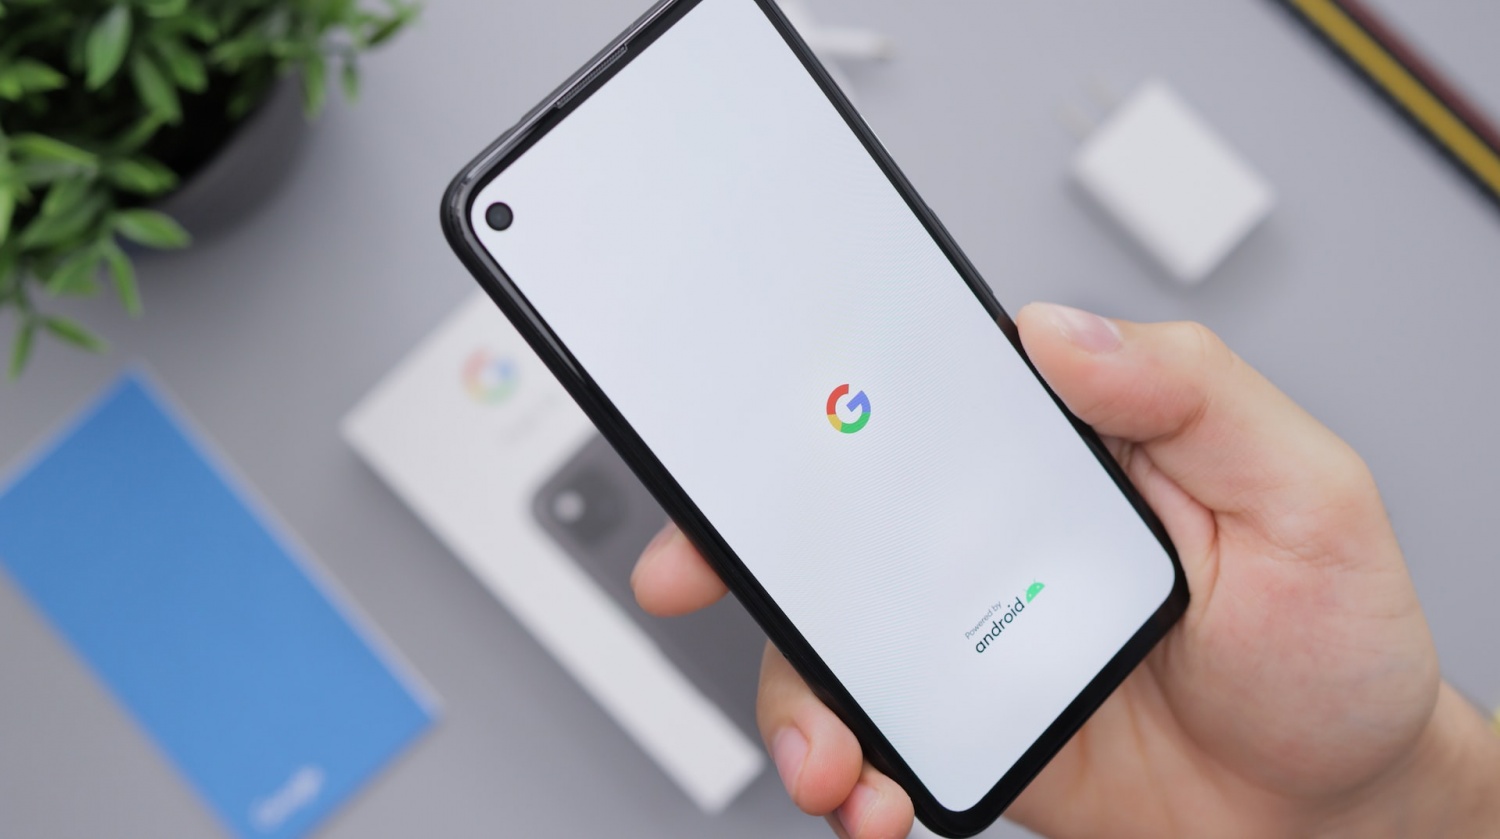 Pixel Users May Need More Time to Adjust to the Google Lens Shortcut